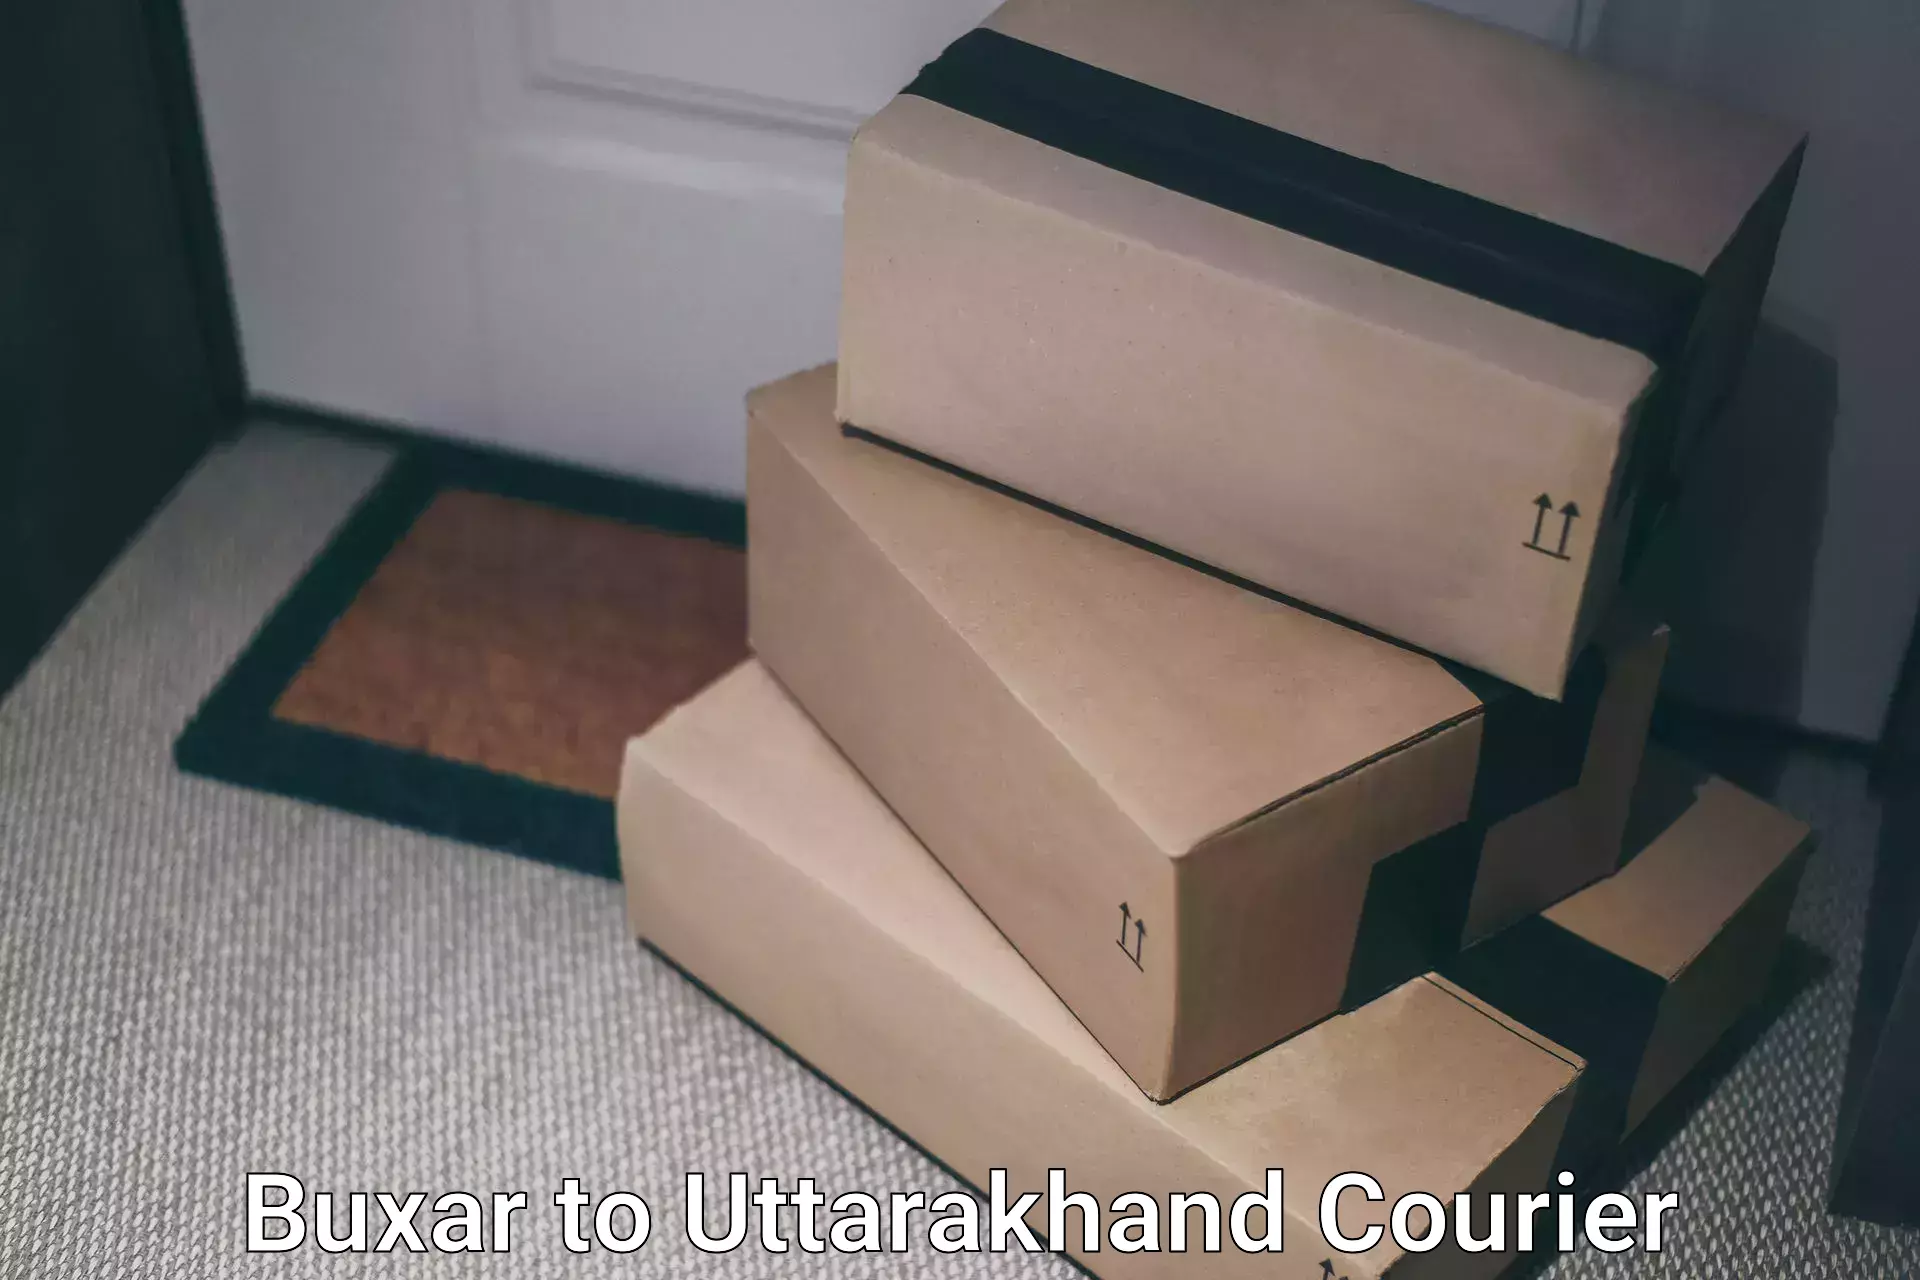 State-of-the-art courier technology Buxar to Tehri Garhwal